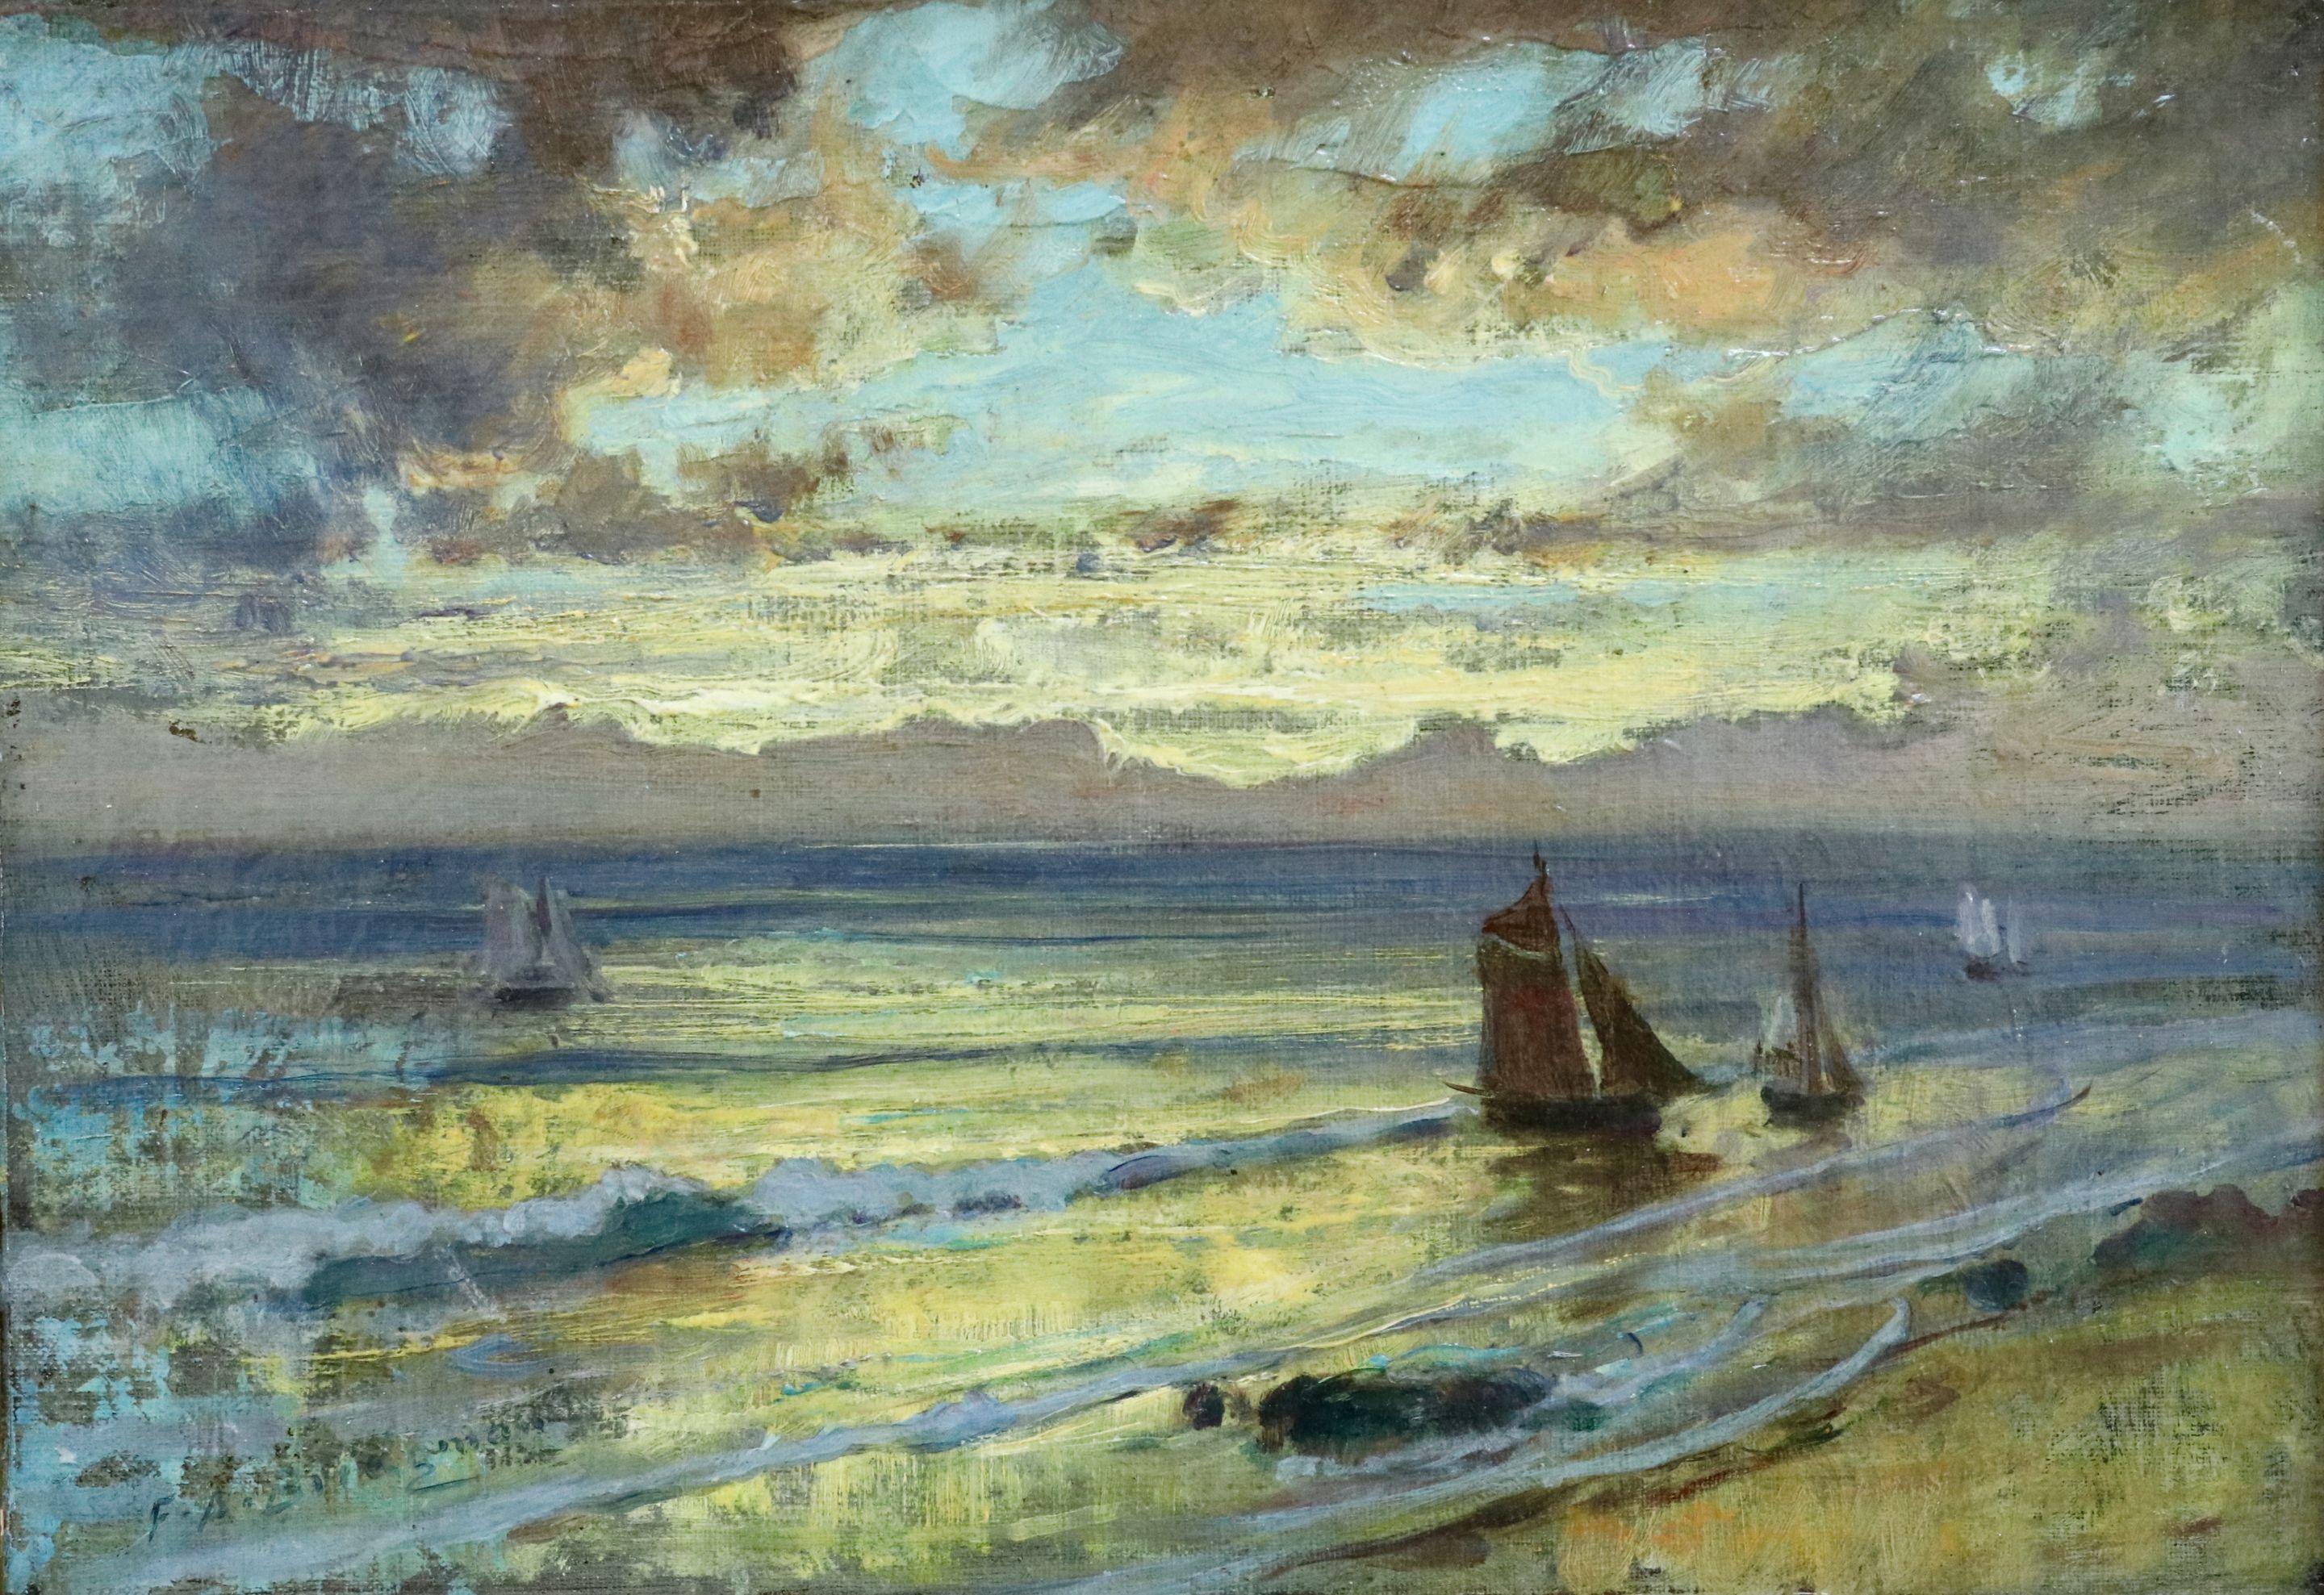 Sunset - 19th Century Oil, Boats at Sea at Evening Landscape by F A Bridgman - Painting by Frederick Arthur Bridgman